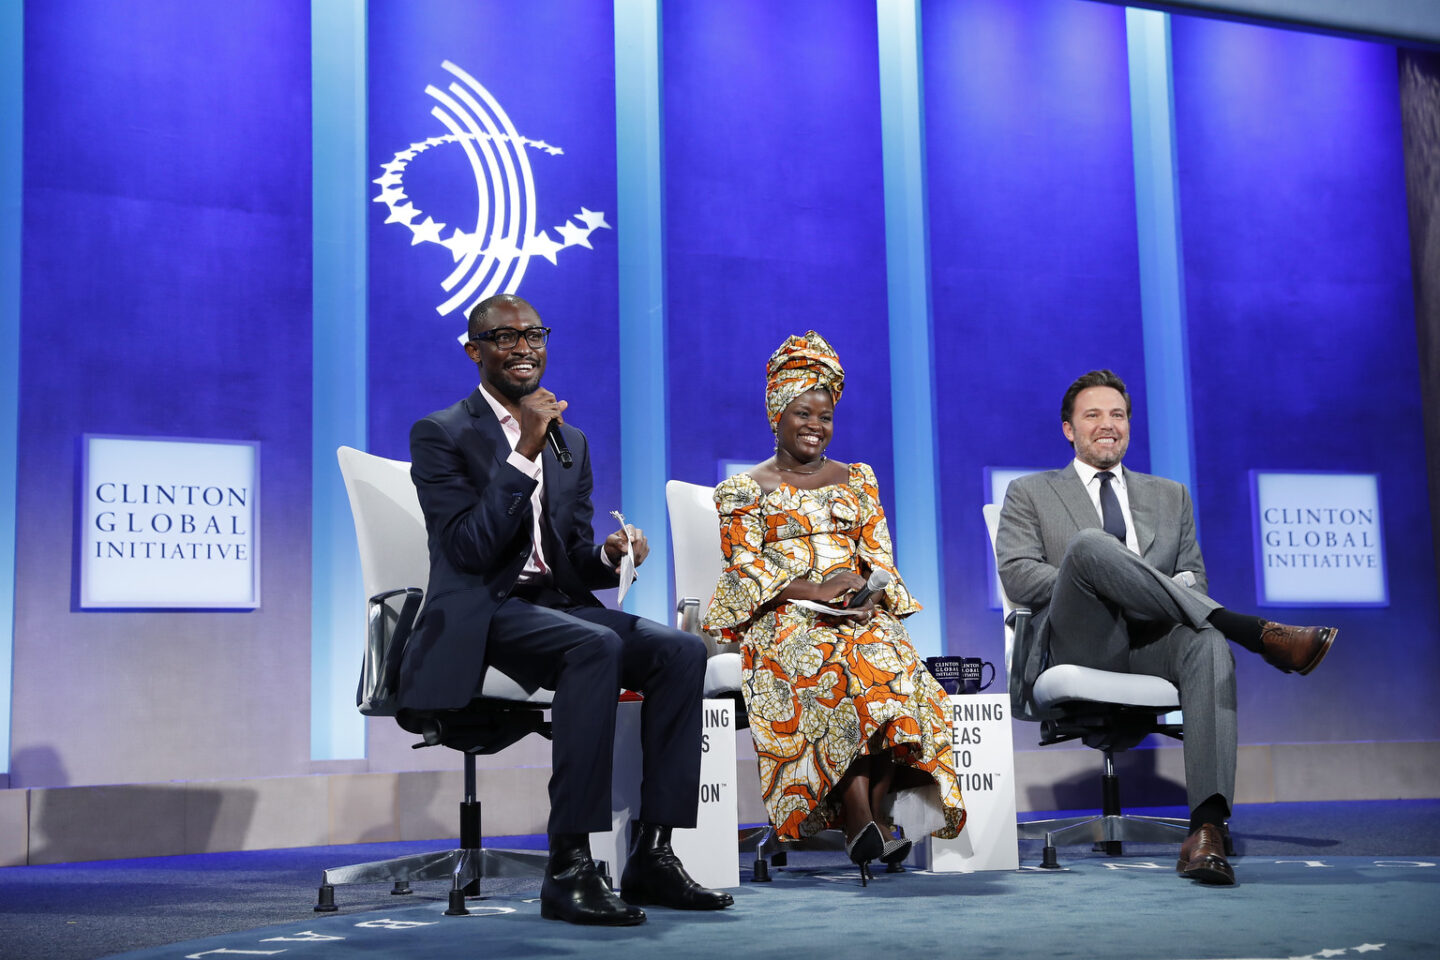 Ben Affleck and others participate in a plenary session